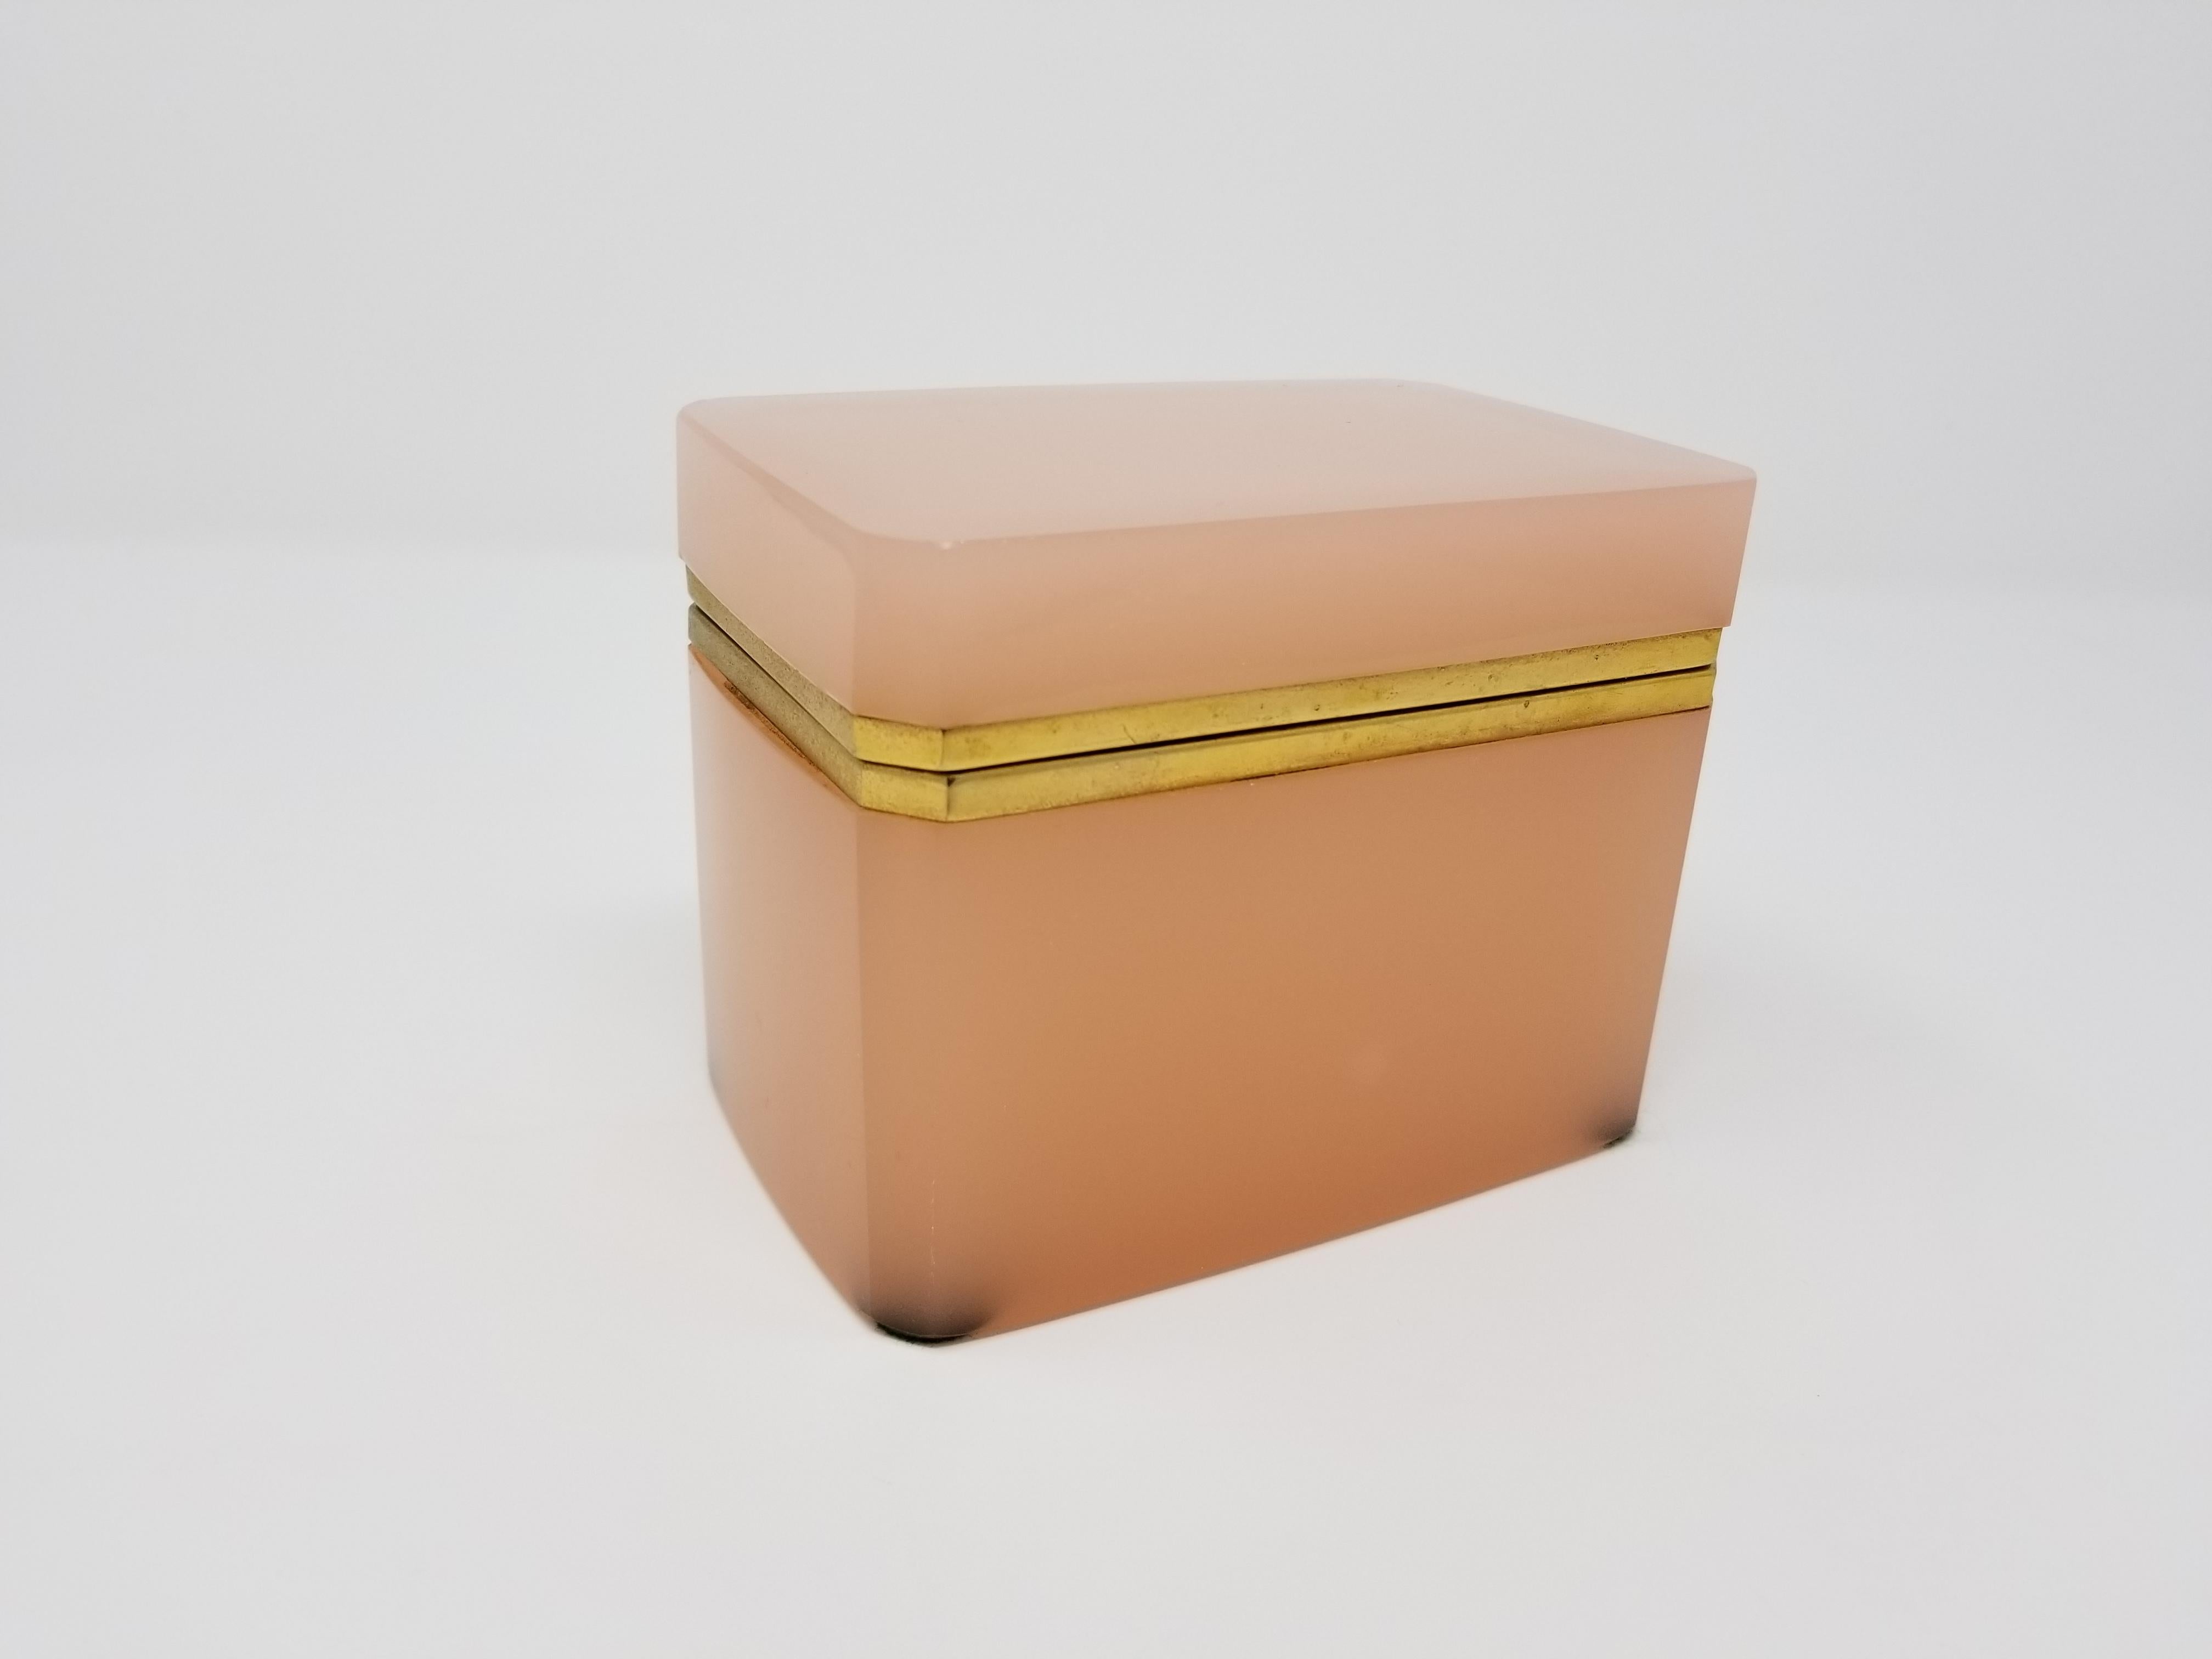 A beautiful French bronze doré mount hand-diamond cut-crystal peach pink opaline casket box with clipped corners. Opaline of this quality and color is truly difficult to find. Each section of this crystal box has been carefully hand-diamond cut with